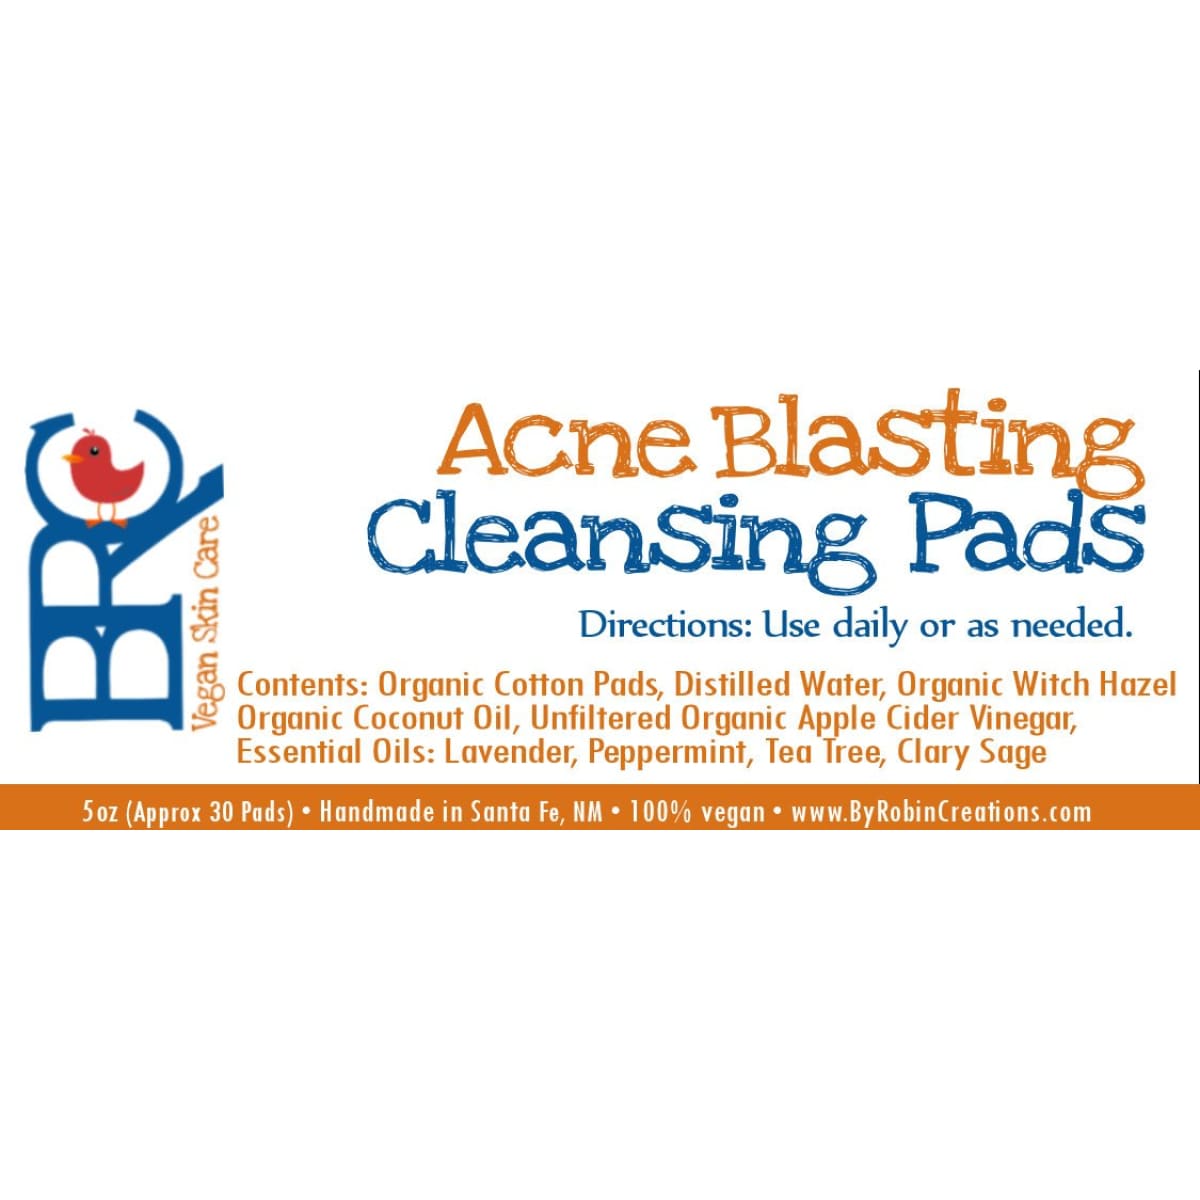 Clear Skin Acne Blasting Face Cleansing Pads | By Robin Creations 